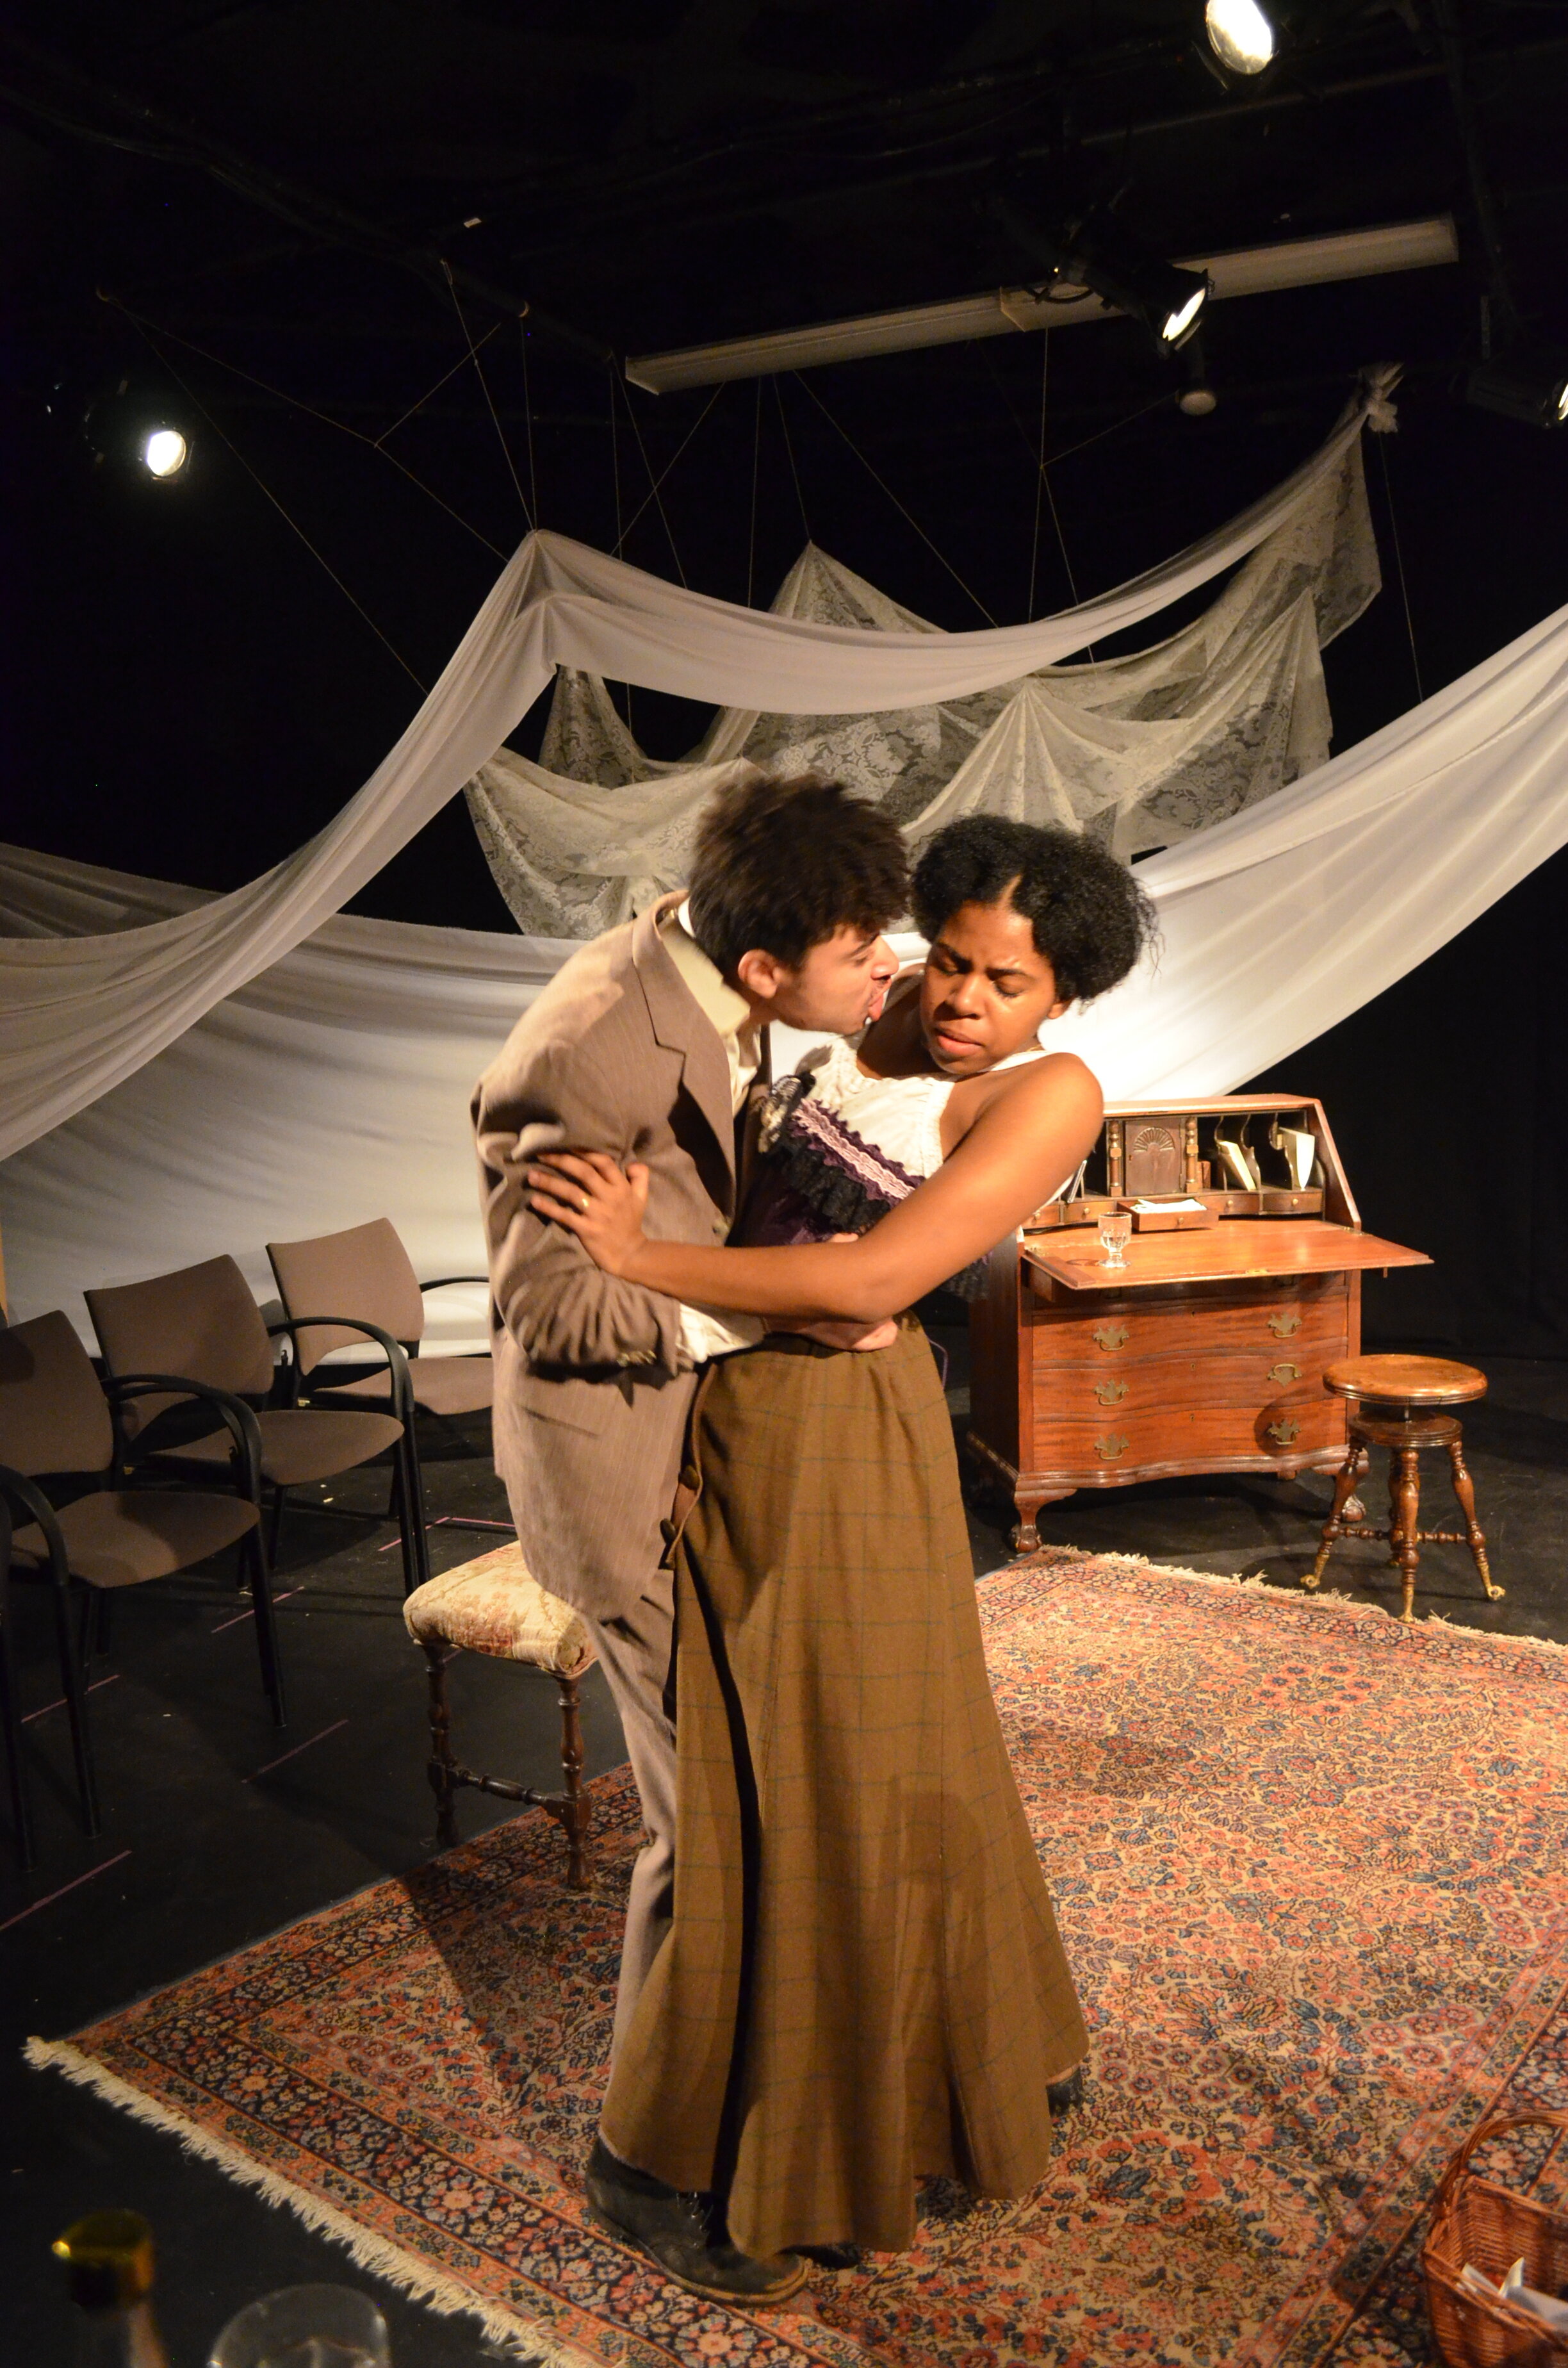  Miles Jordan as George Armstrong and  Dani Palmer  as Esther Mills in INTIMATE APPAREL, directed by Avital Shira.  Photo by  Stephanie Lynn Yackovetsky . 